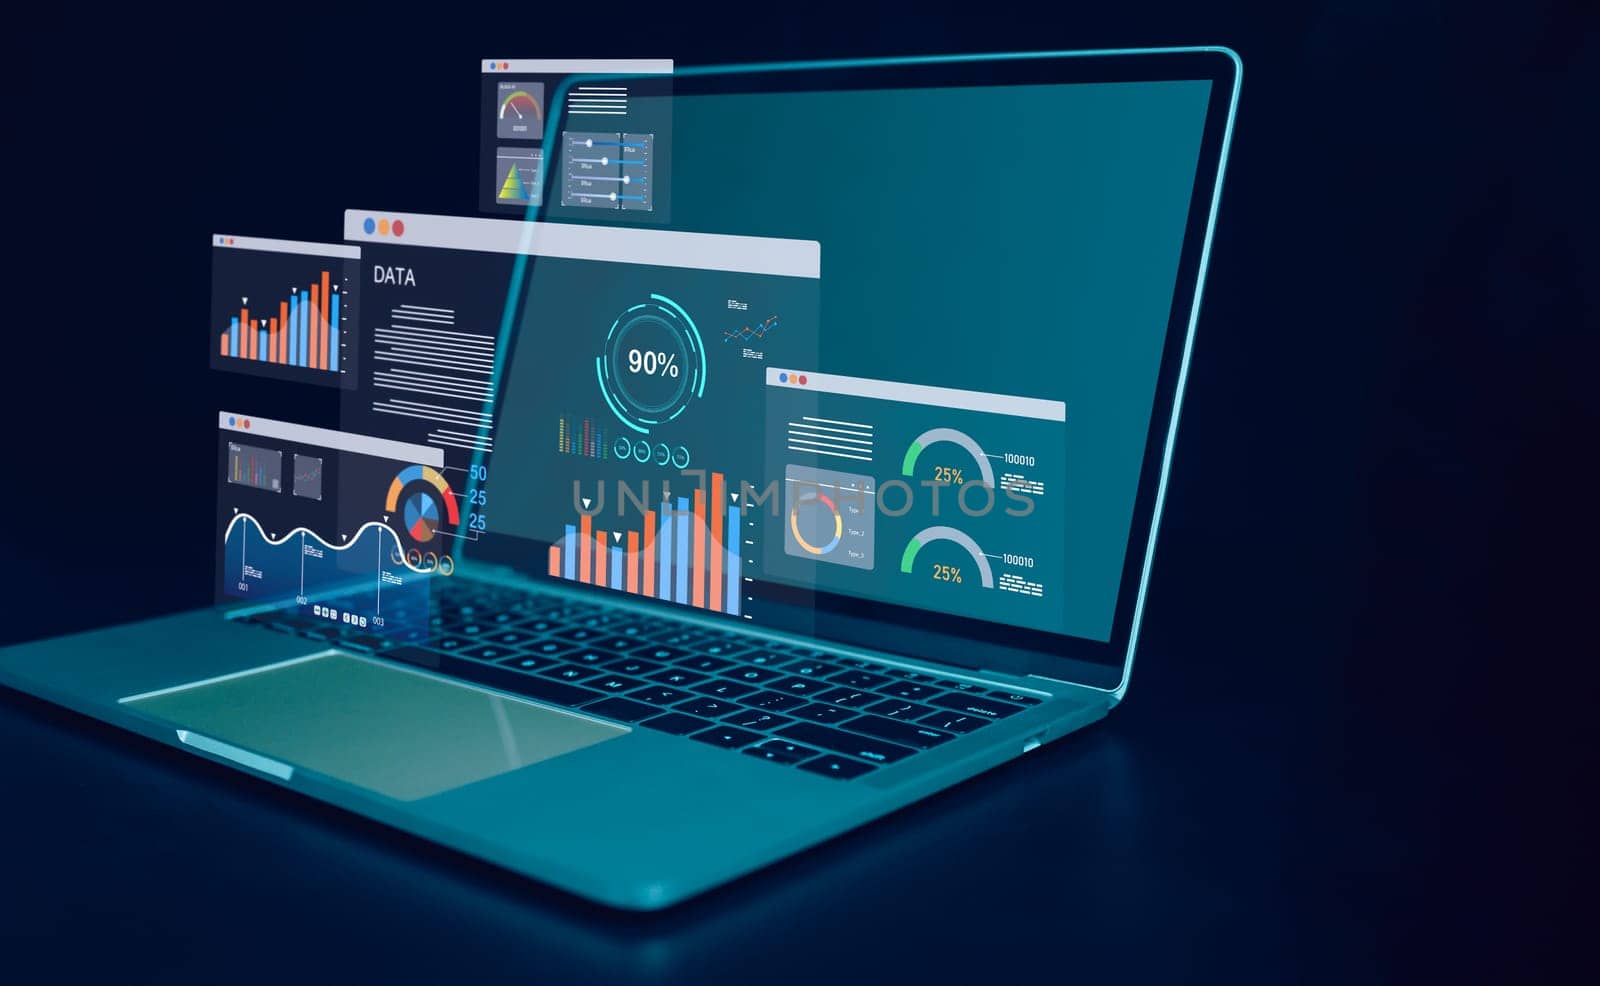 Laptop computer on dark background and dashboard for business analysis. Data and management system with KPIs and indicators connected to databases for finance, technology, operations, marketing, sales analysis. by Unimages2527